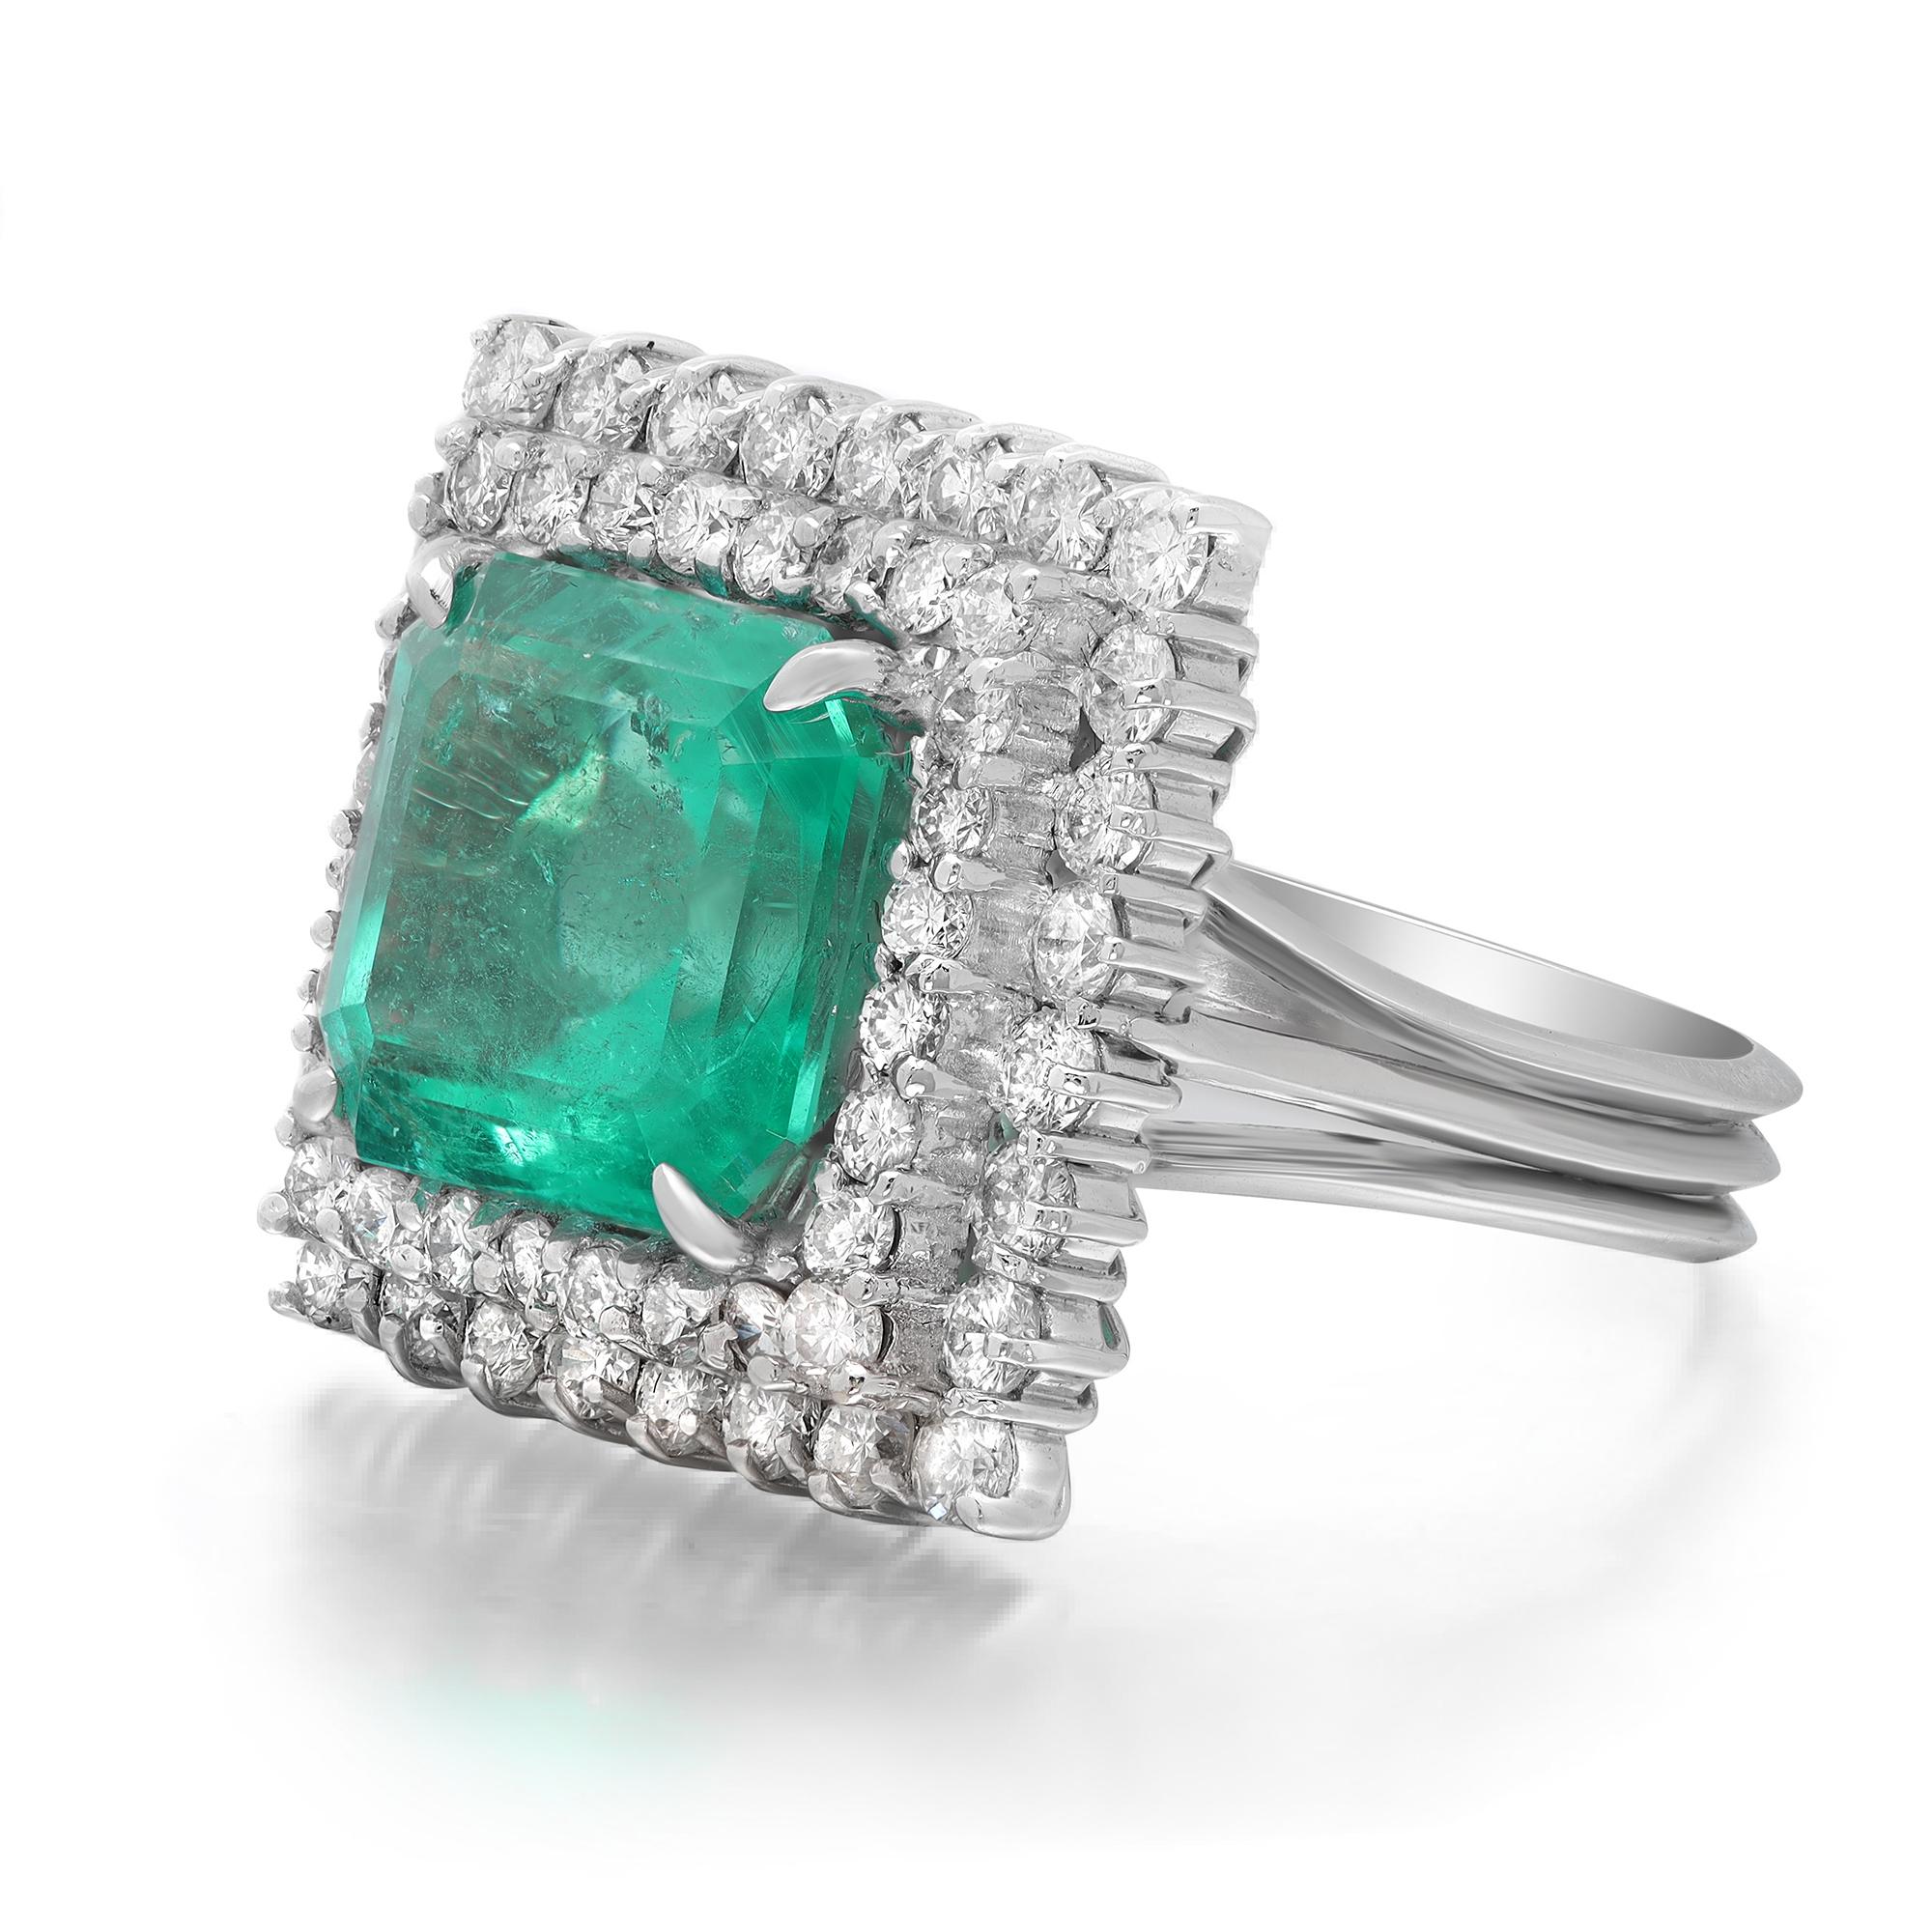 This stunning ring features a prong set square shaped green Emerald weighing 7.62 carats that sits atop a halo of bright white sparkling round brilliant cut diamonds weighing 2.06 carats. Crafted in 18k white gold. Ring size: 7. Total weight: 10.76